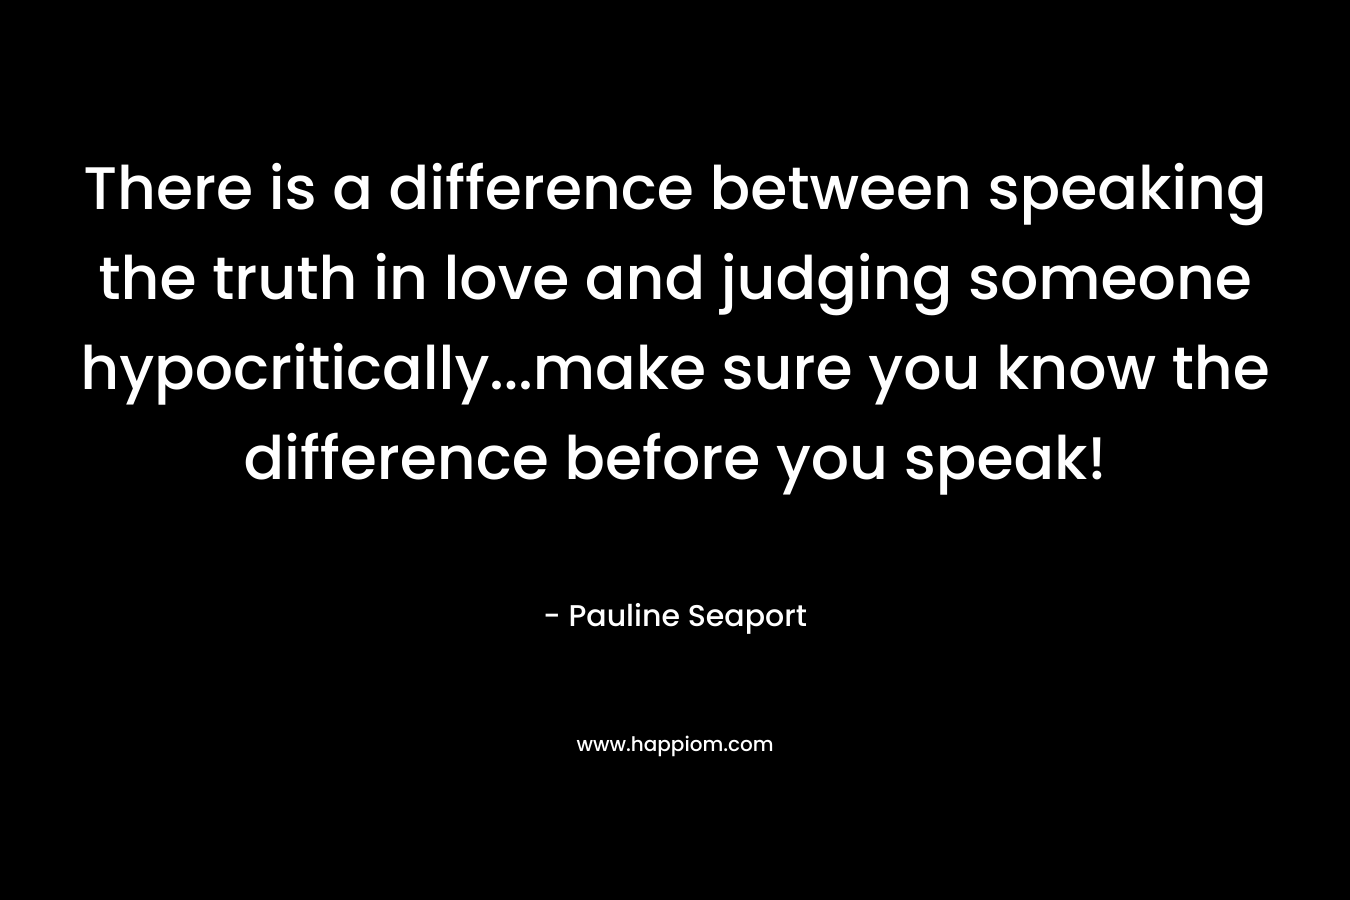 There is a difference between speaking the truth in love and judging someone hypocritically...make sure you know the difference before you speak!